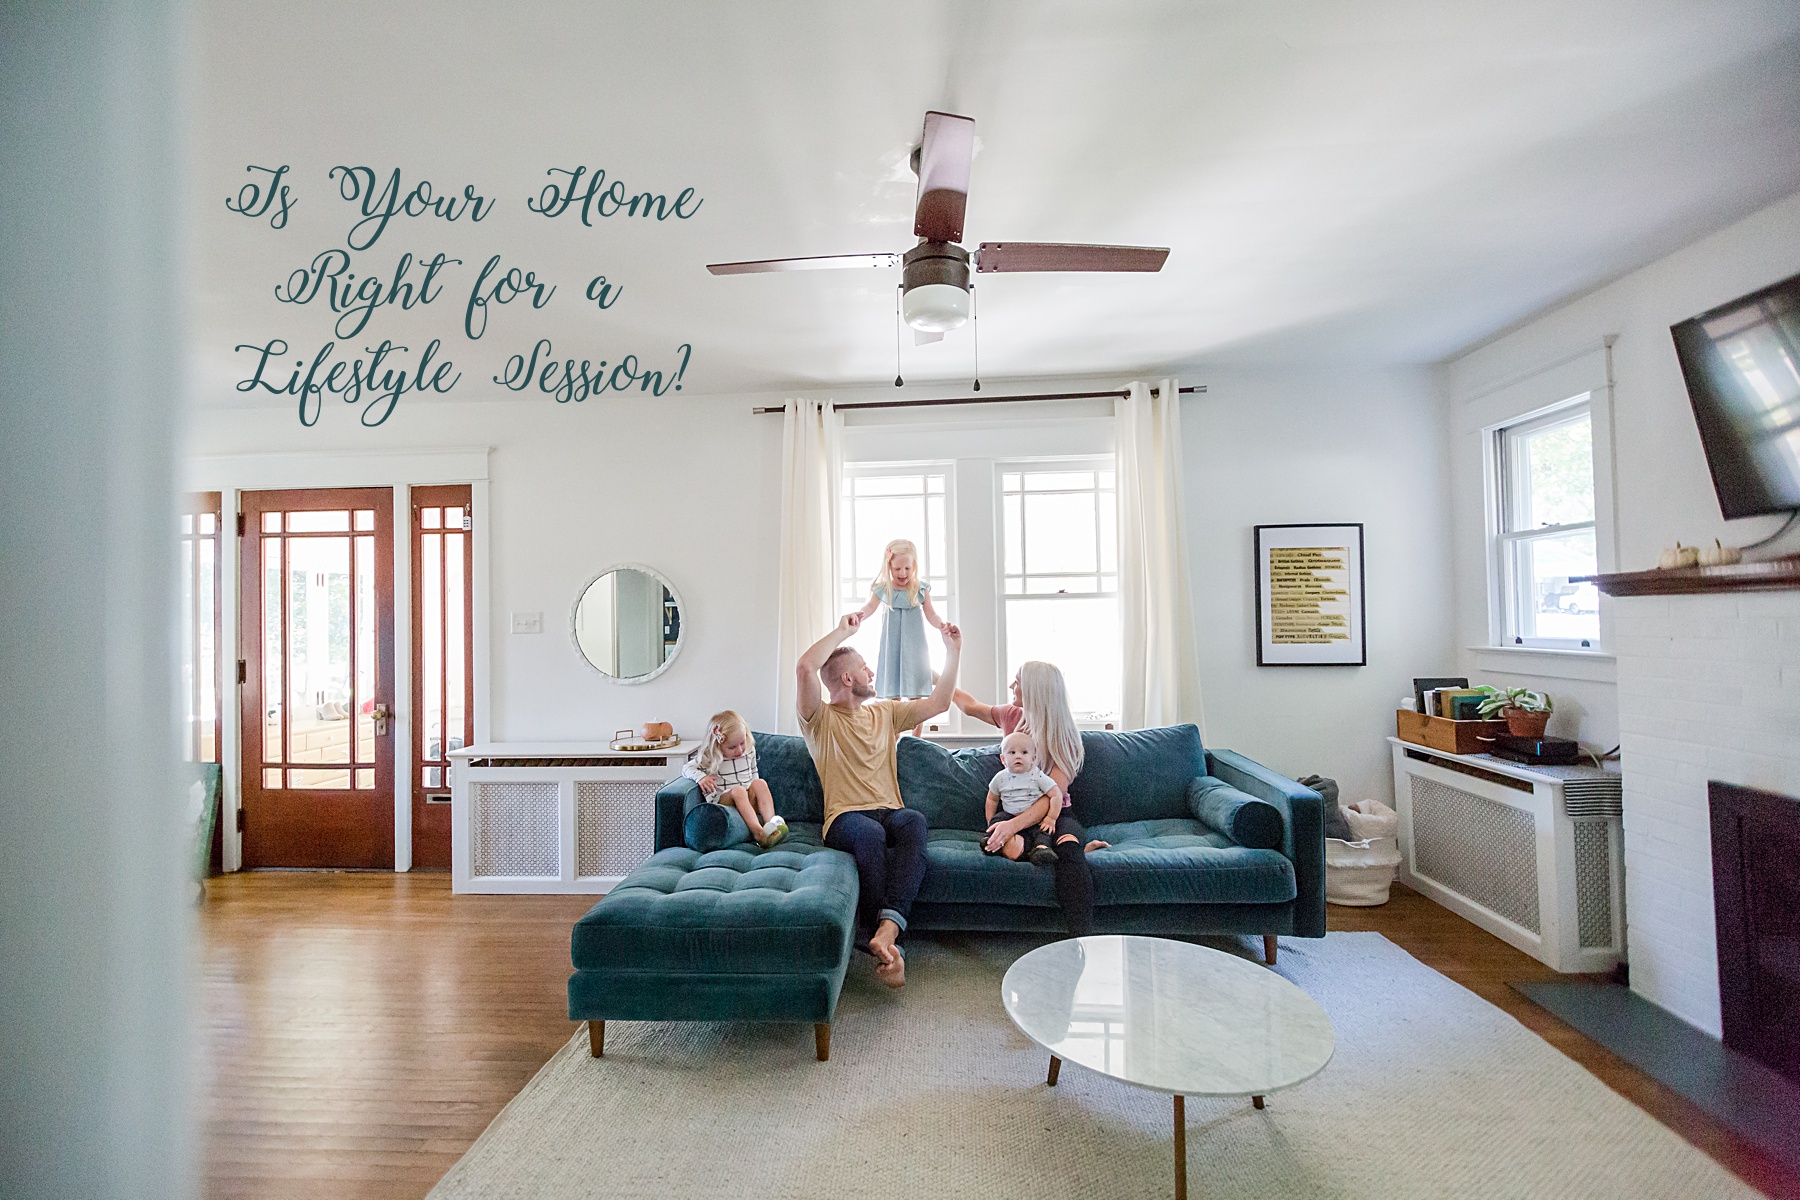 is your home right for a lifestyle session